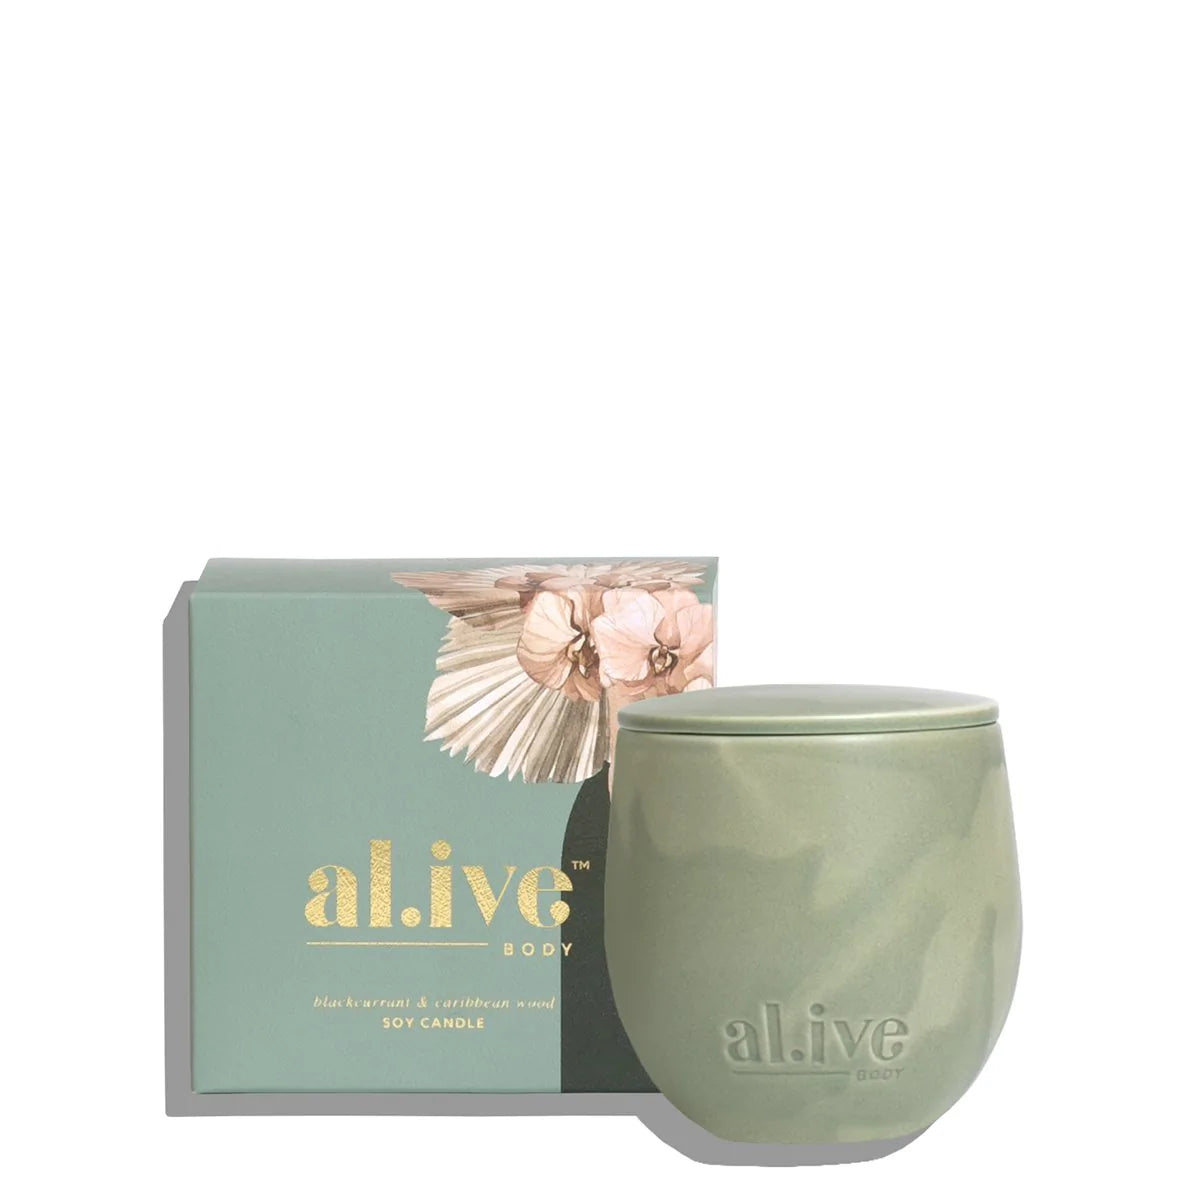 Al.ive Body BLACKCURRANT & CARIBBEAN WOOD SOY CANDLE